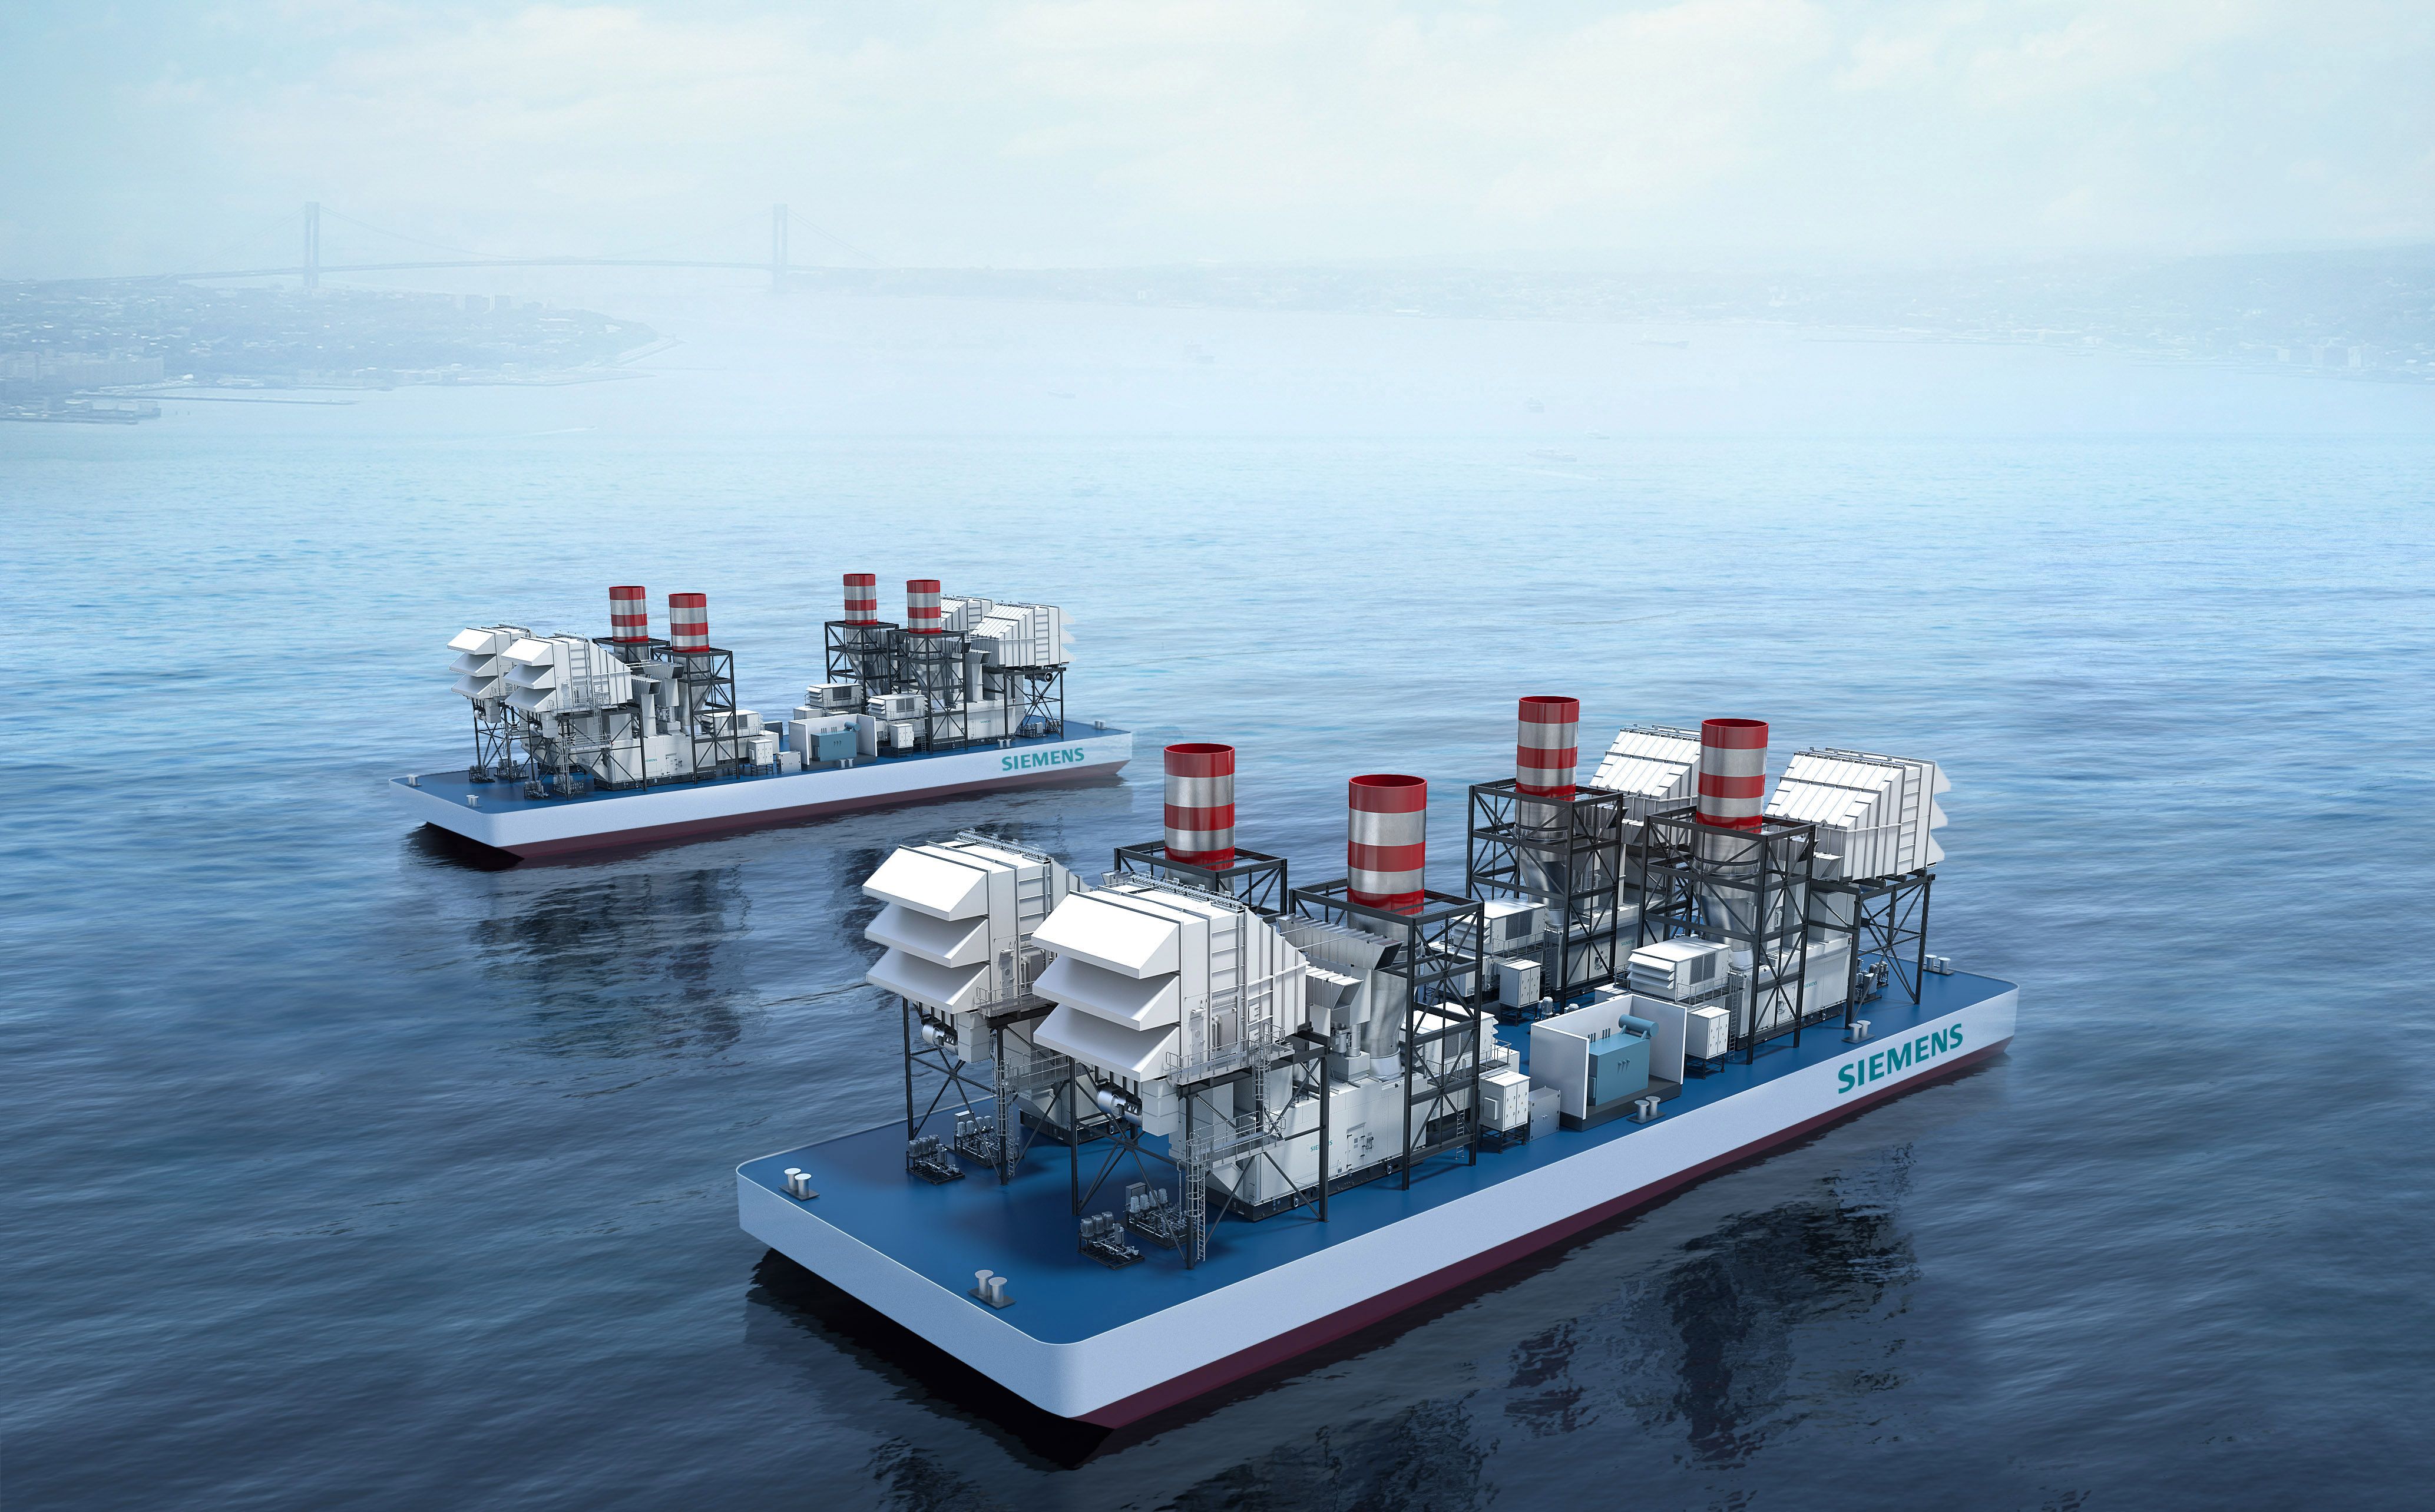 Siemens floating power plants will support New York's renewable